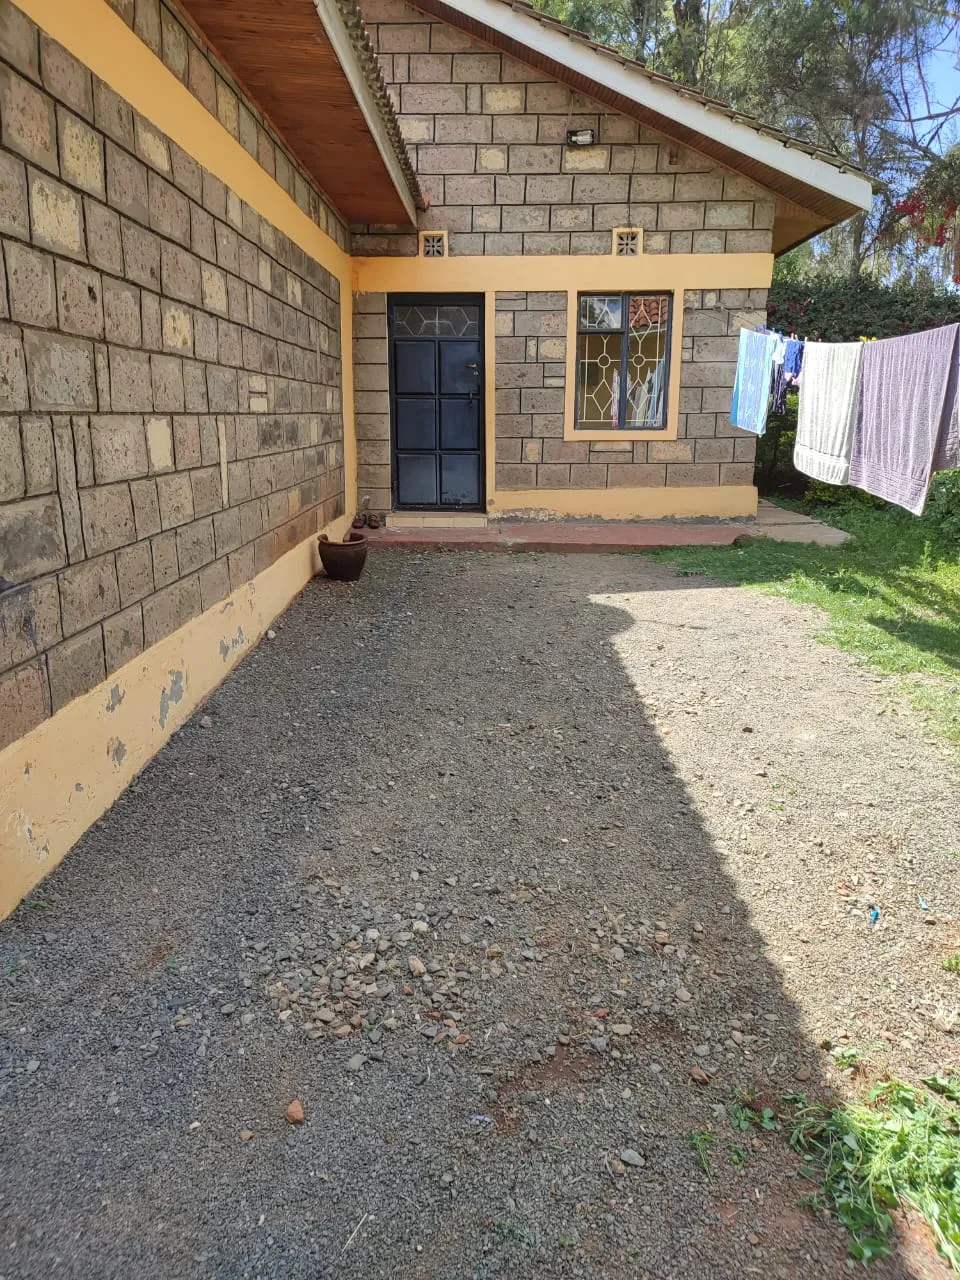 Real Estate House/Apartment For Rent-Two bedroom house both ensuite Karen FOR RENT 15